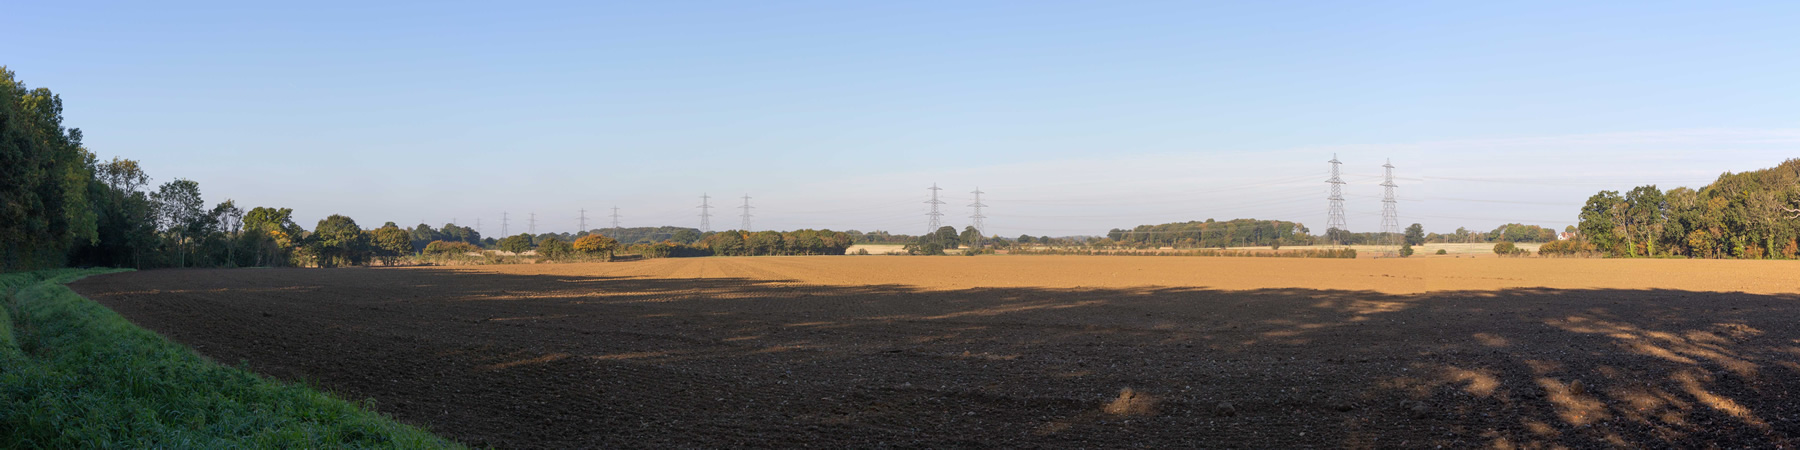 SPR proposed substation sites view from Grove Road, Friston before EA1N & EA2.